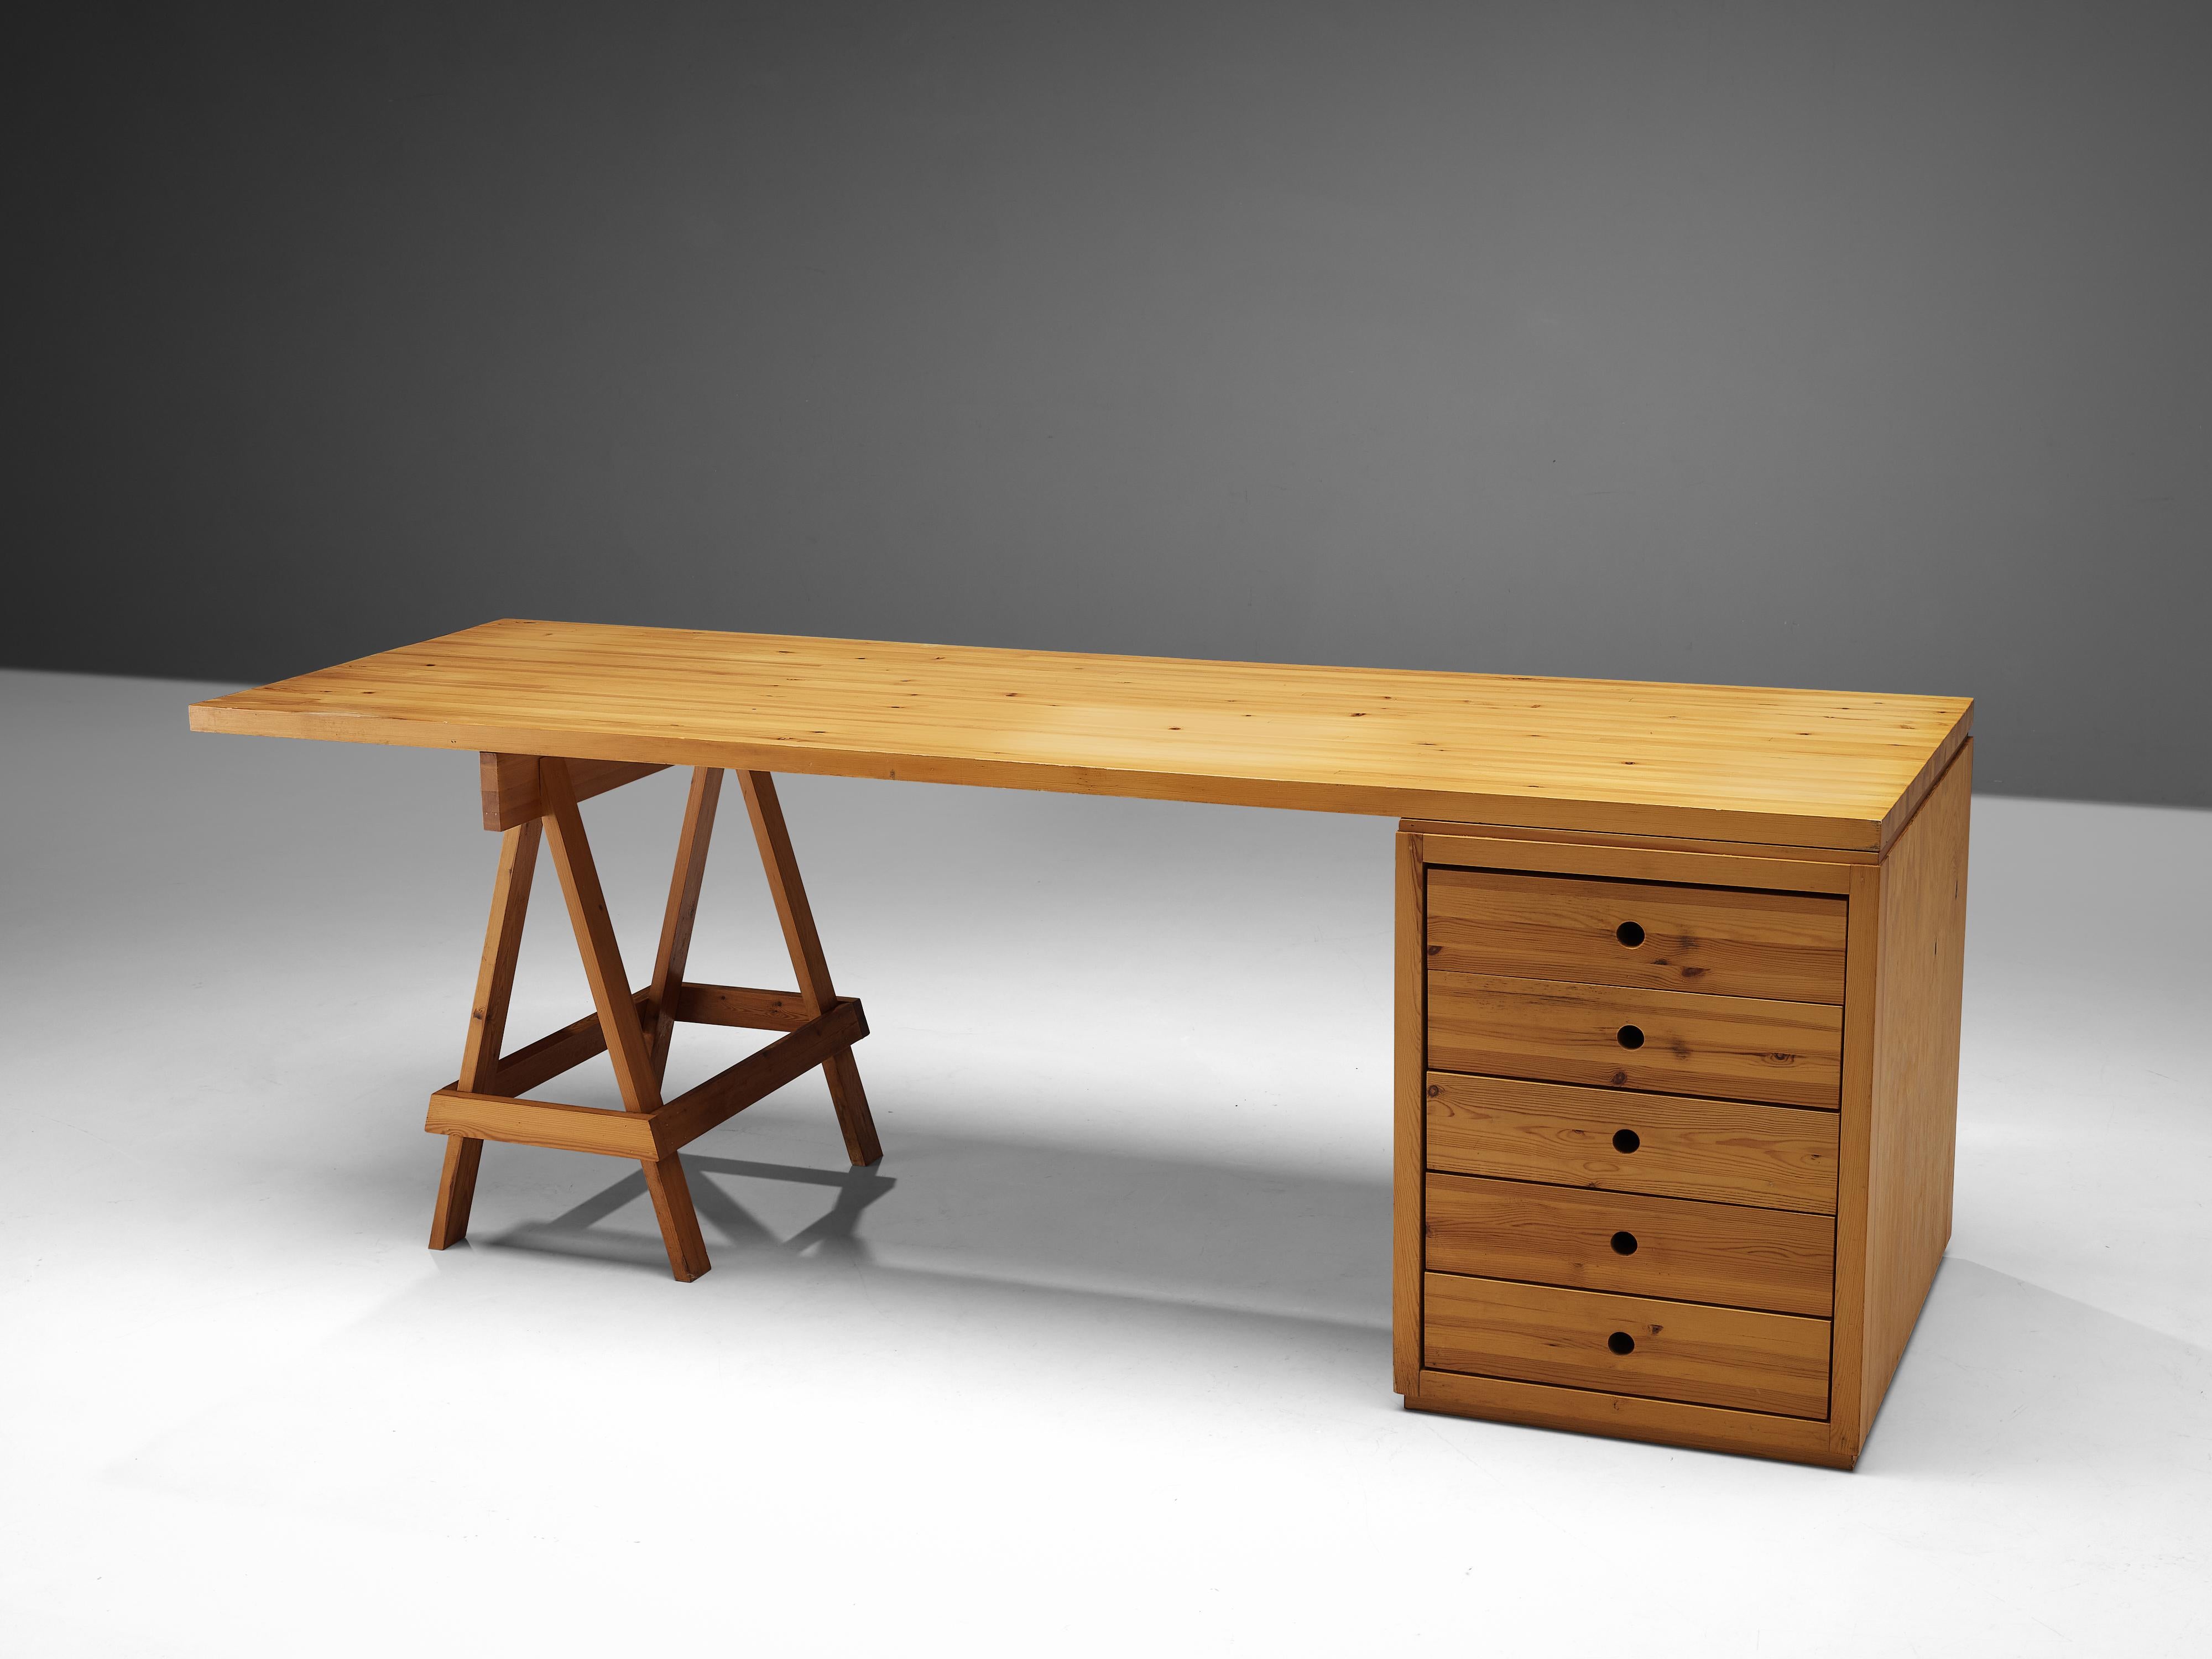 Ate van Apeldoorn for Houtwerk Hattem, desk with chest of drawers, solid pine, The Netherlands, 1960s

This asymmetrically designed desk by Ate van Apeldoorn can be placed as a free-standing element in the room. A striking tension is created by